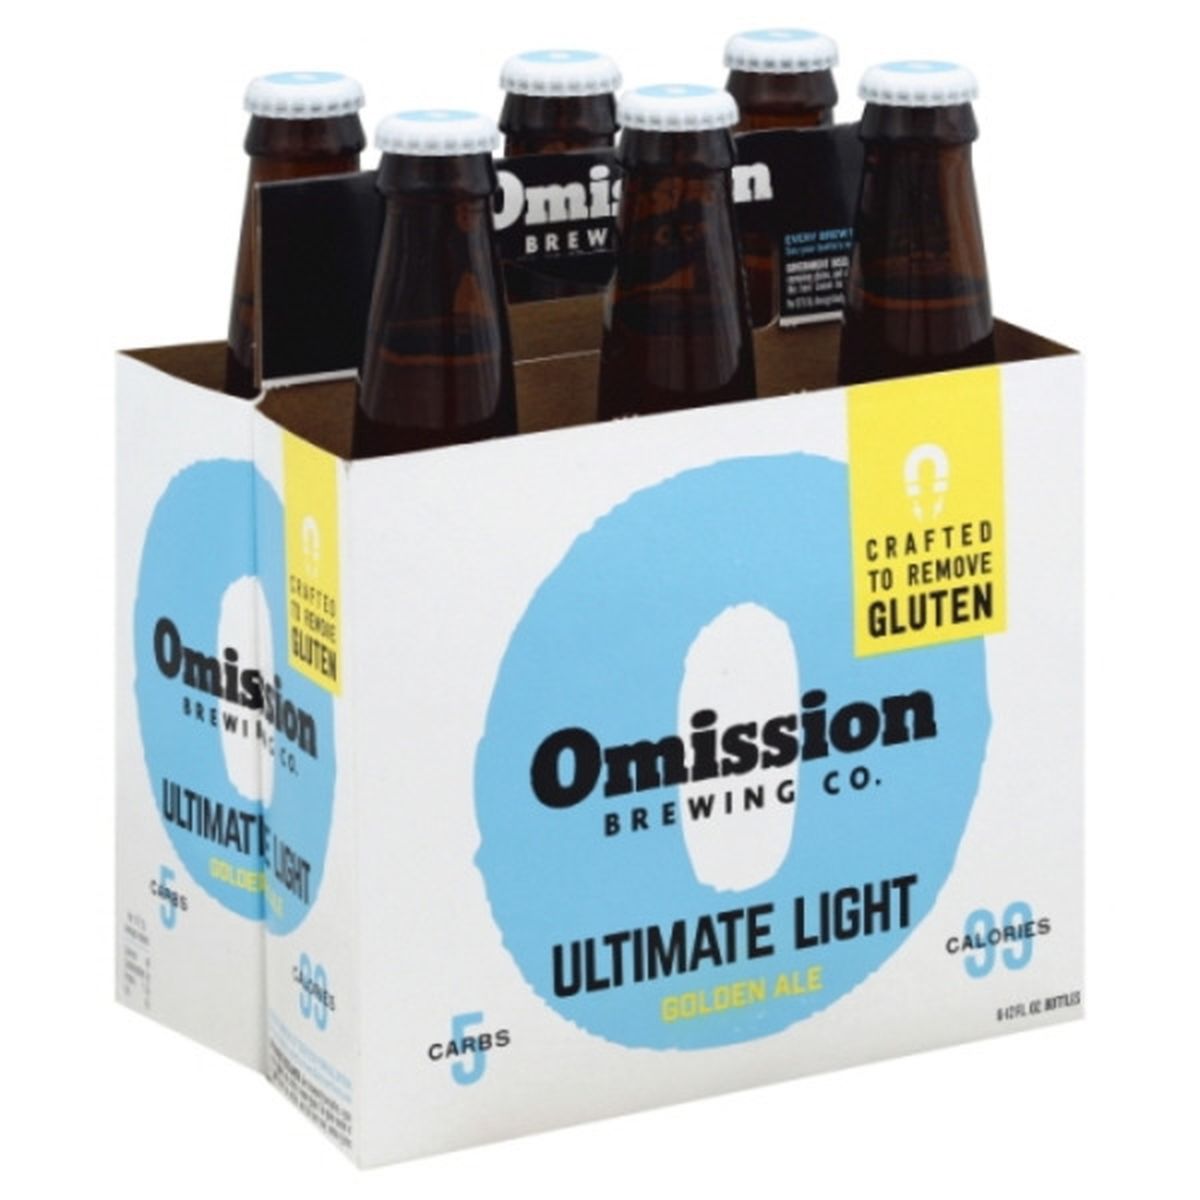 Calories in Omission Brewing Co. Ultimate  6/12 oz bottles